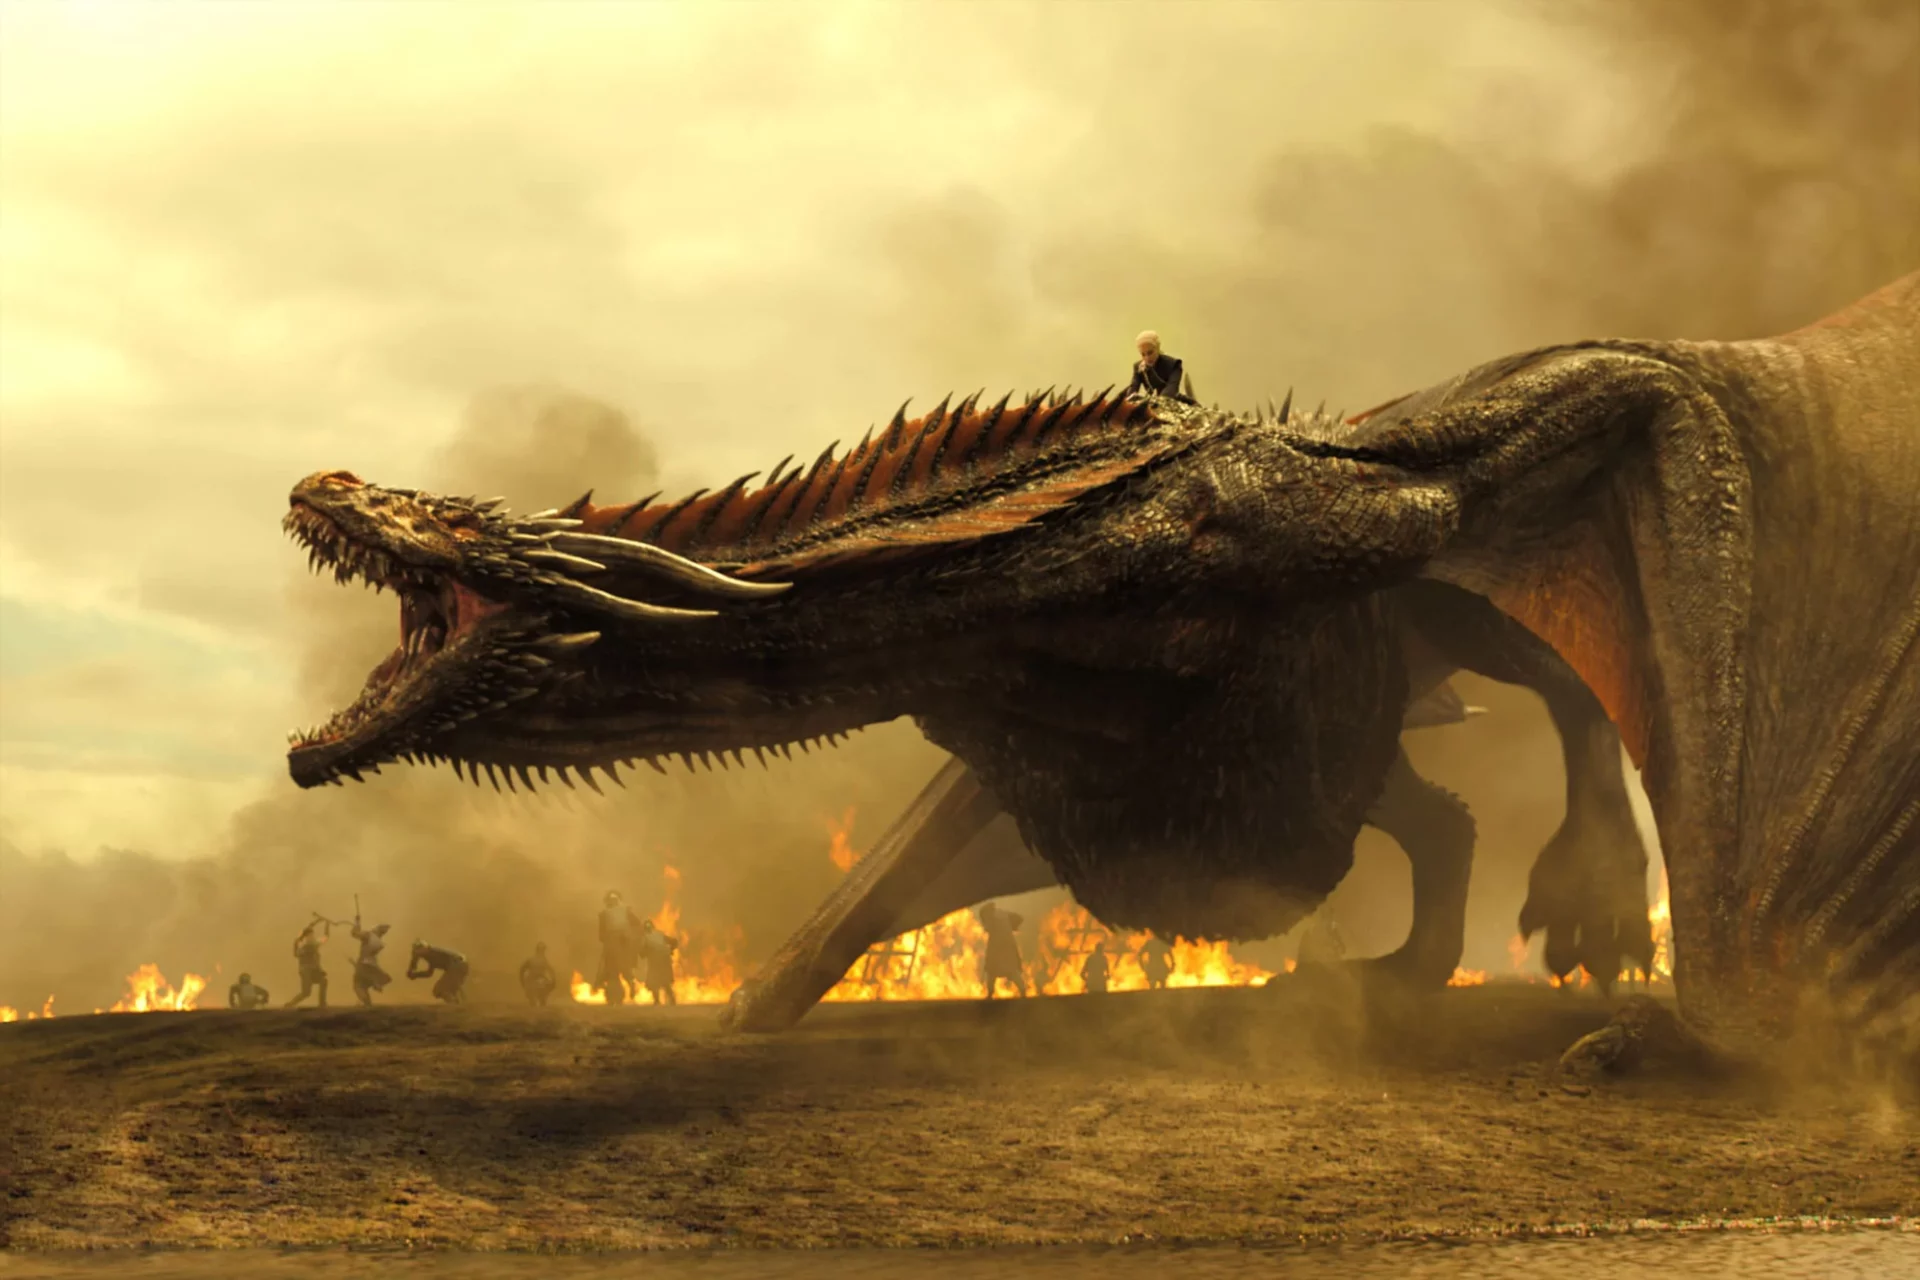 Game of Thrones dragons